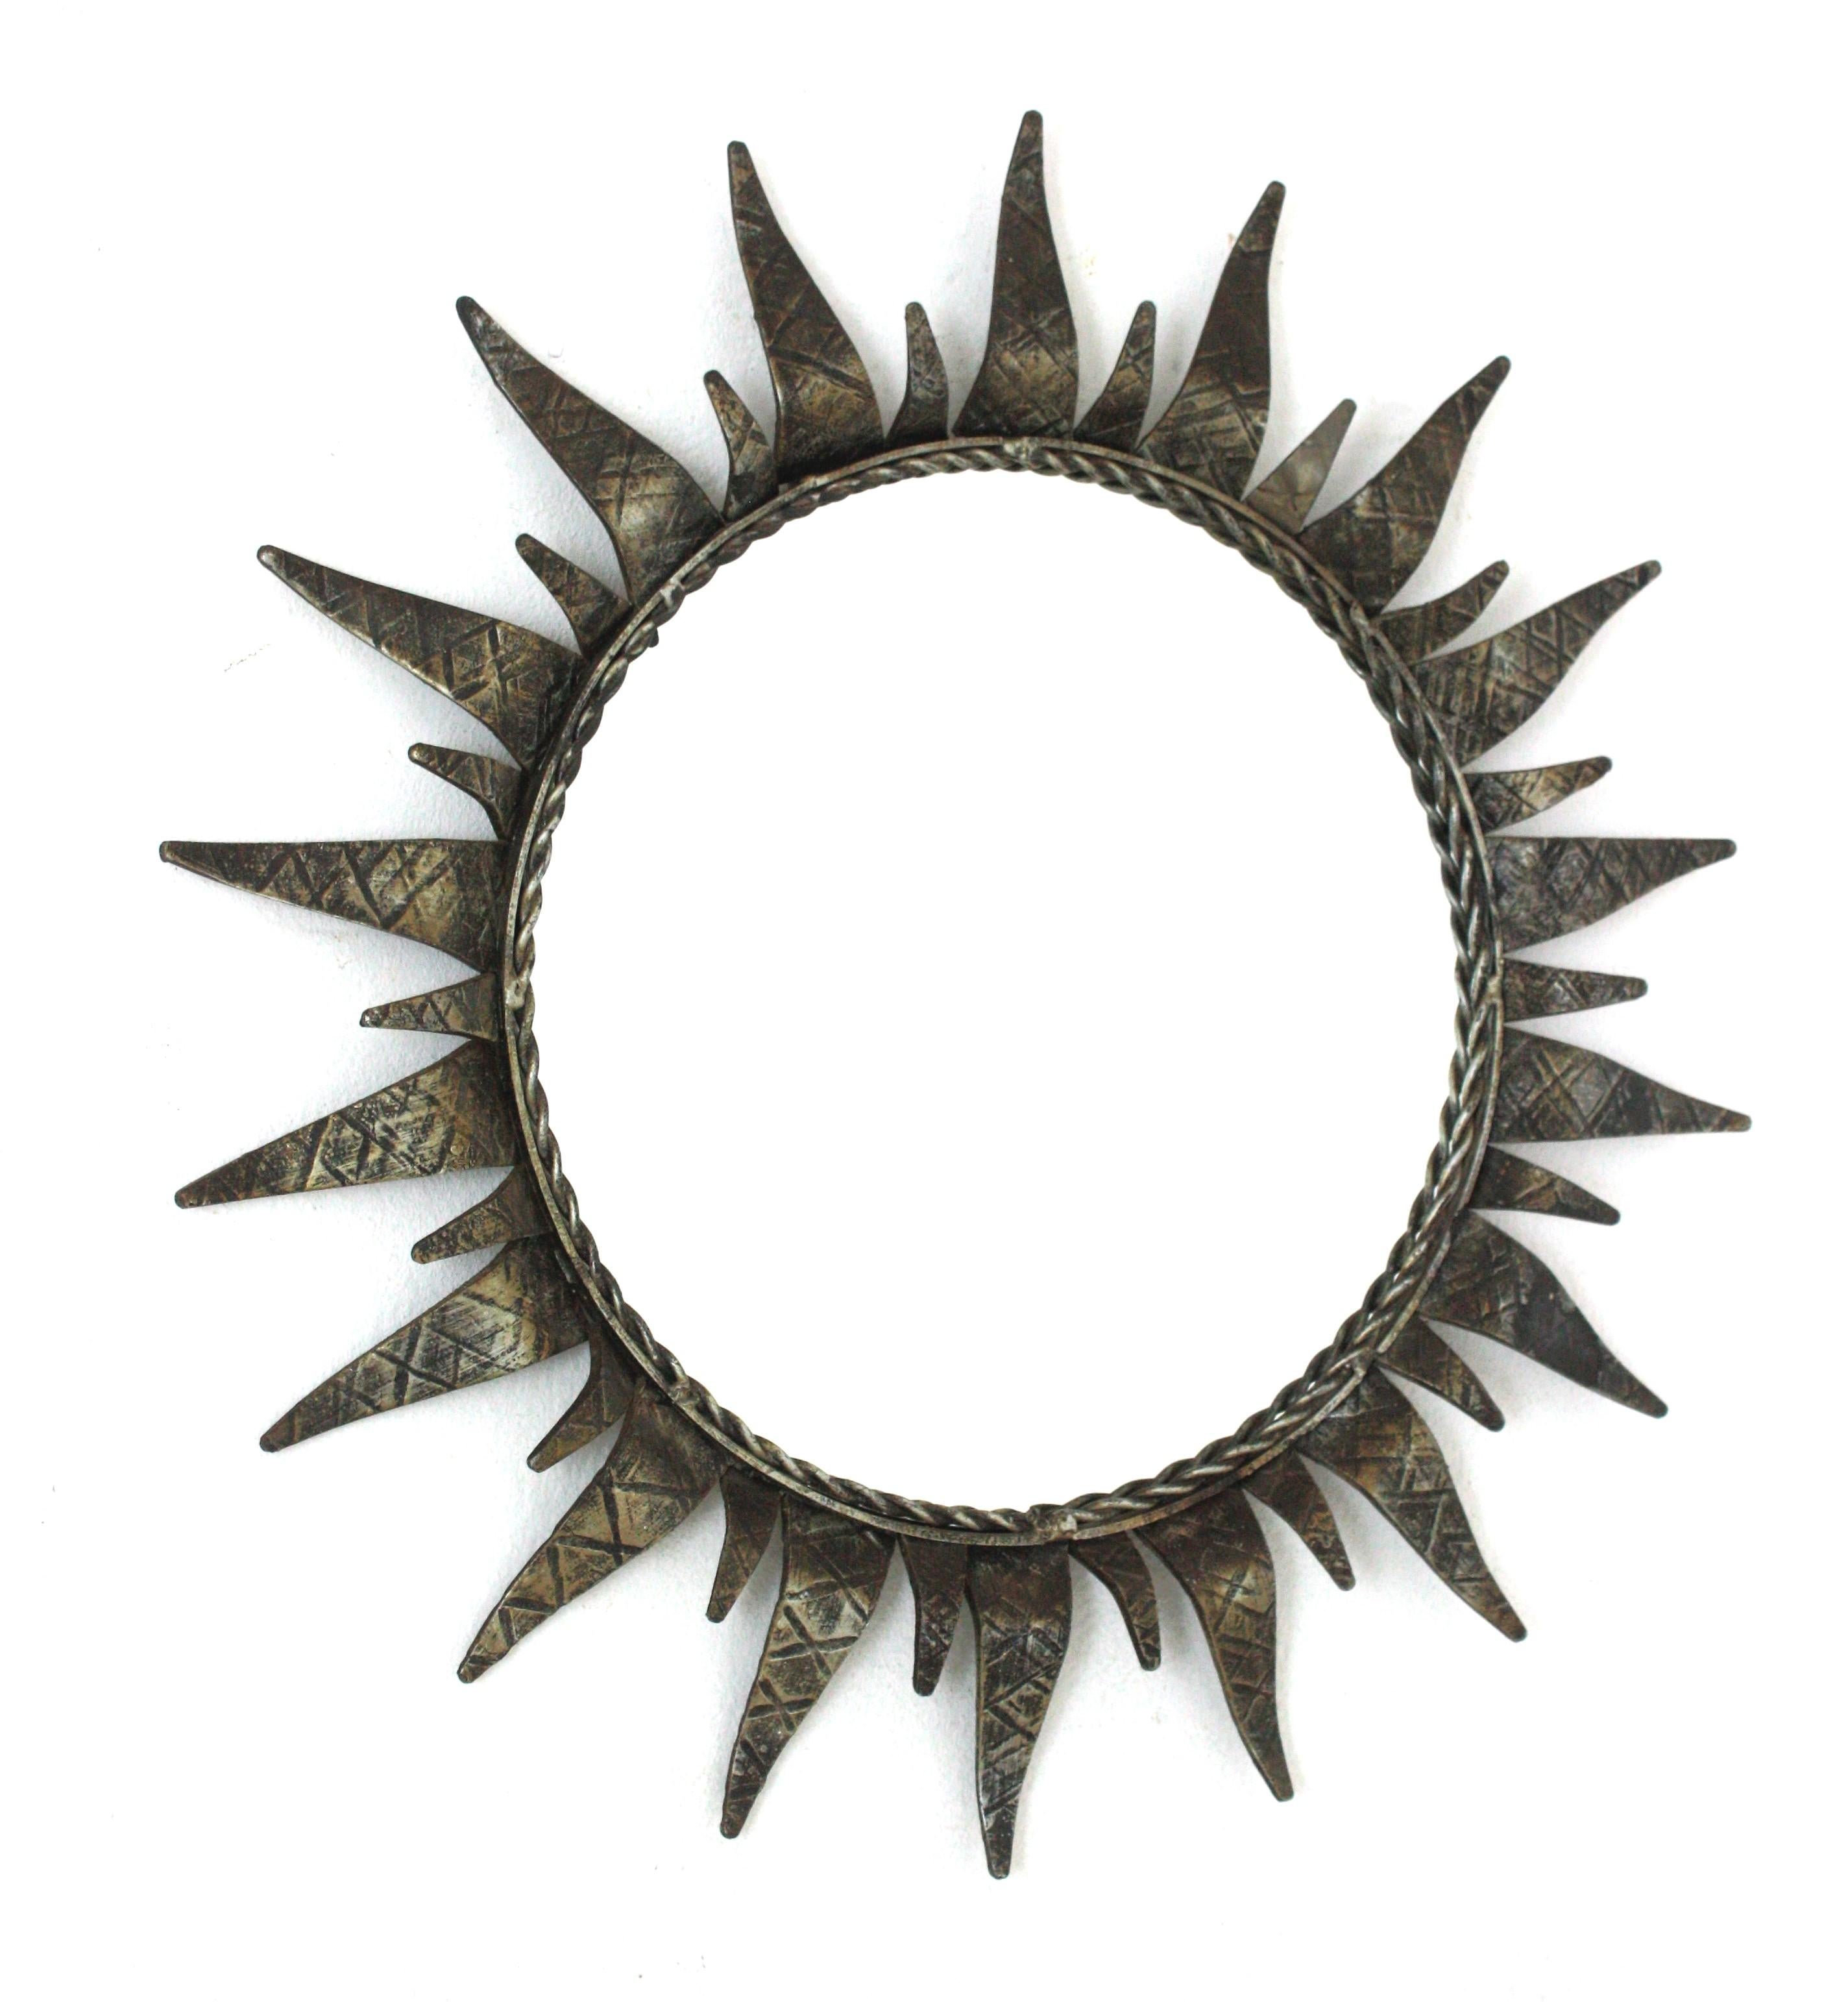 Round Sunburst Mirror in Silver Gilt Wrought Iron
Mid-Century Modern wrought iron sunburst round wall mirror with silvered gilt finish, Spain, 1950s.
This highly decorative sunburst gilt iron mirror has a nice silvered color and a terrific aged